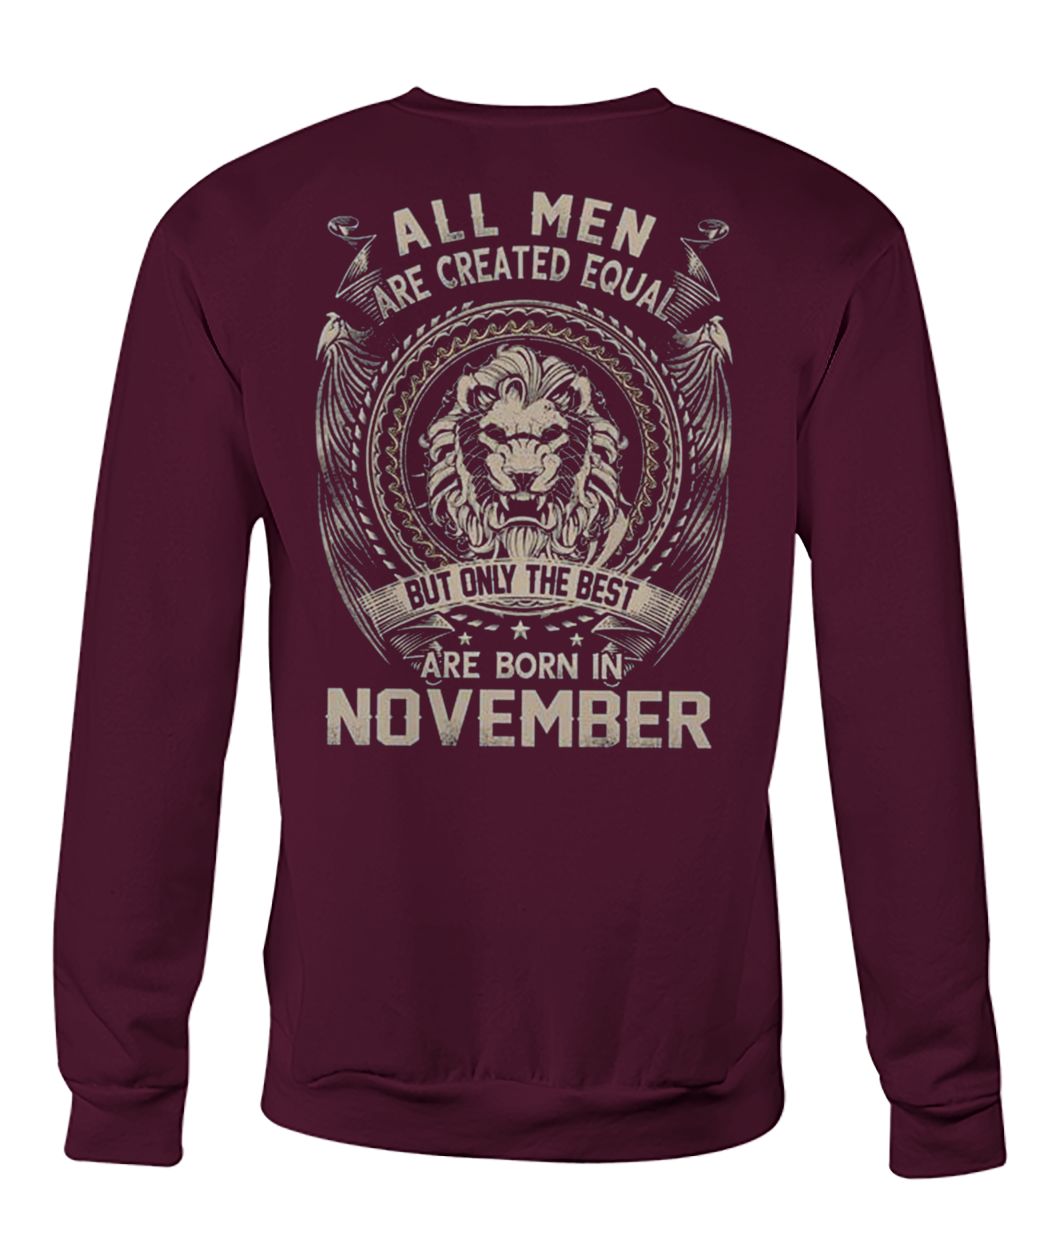 All men created equal but the best are born in november crew neck sweatshirt